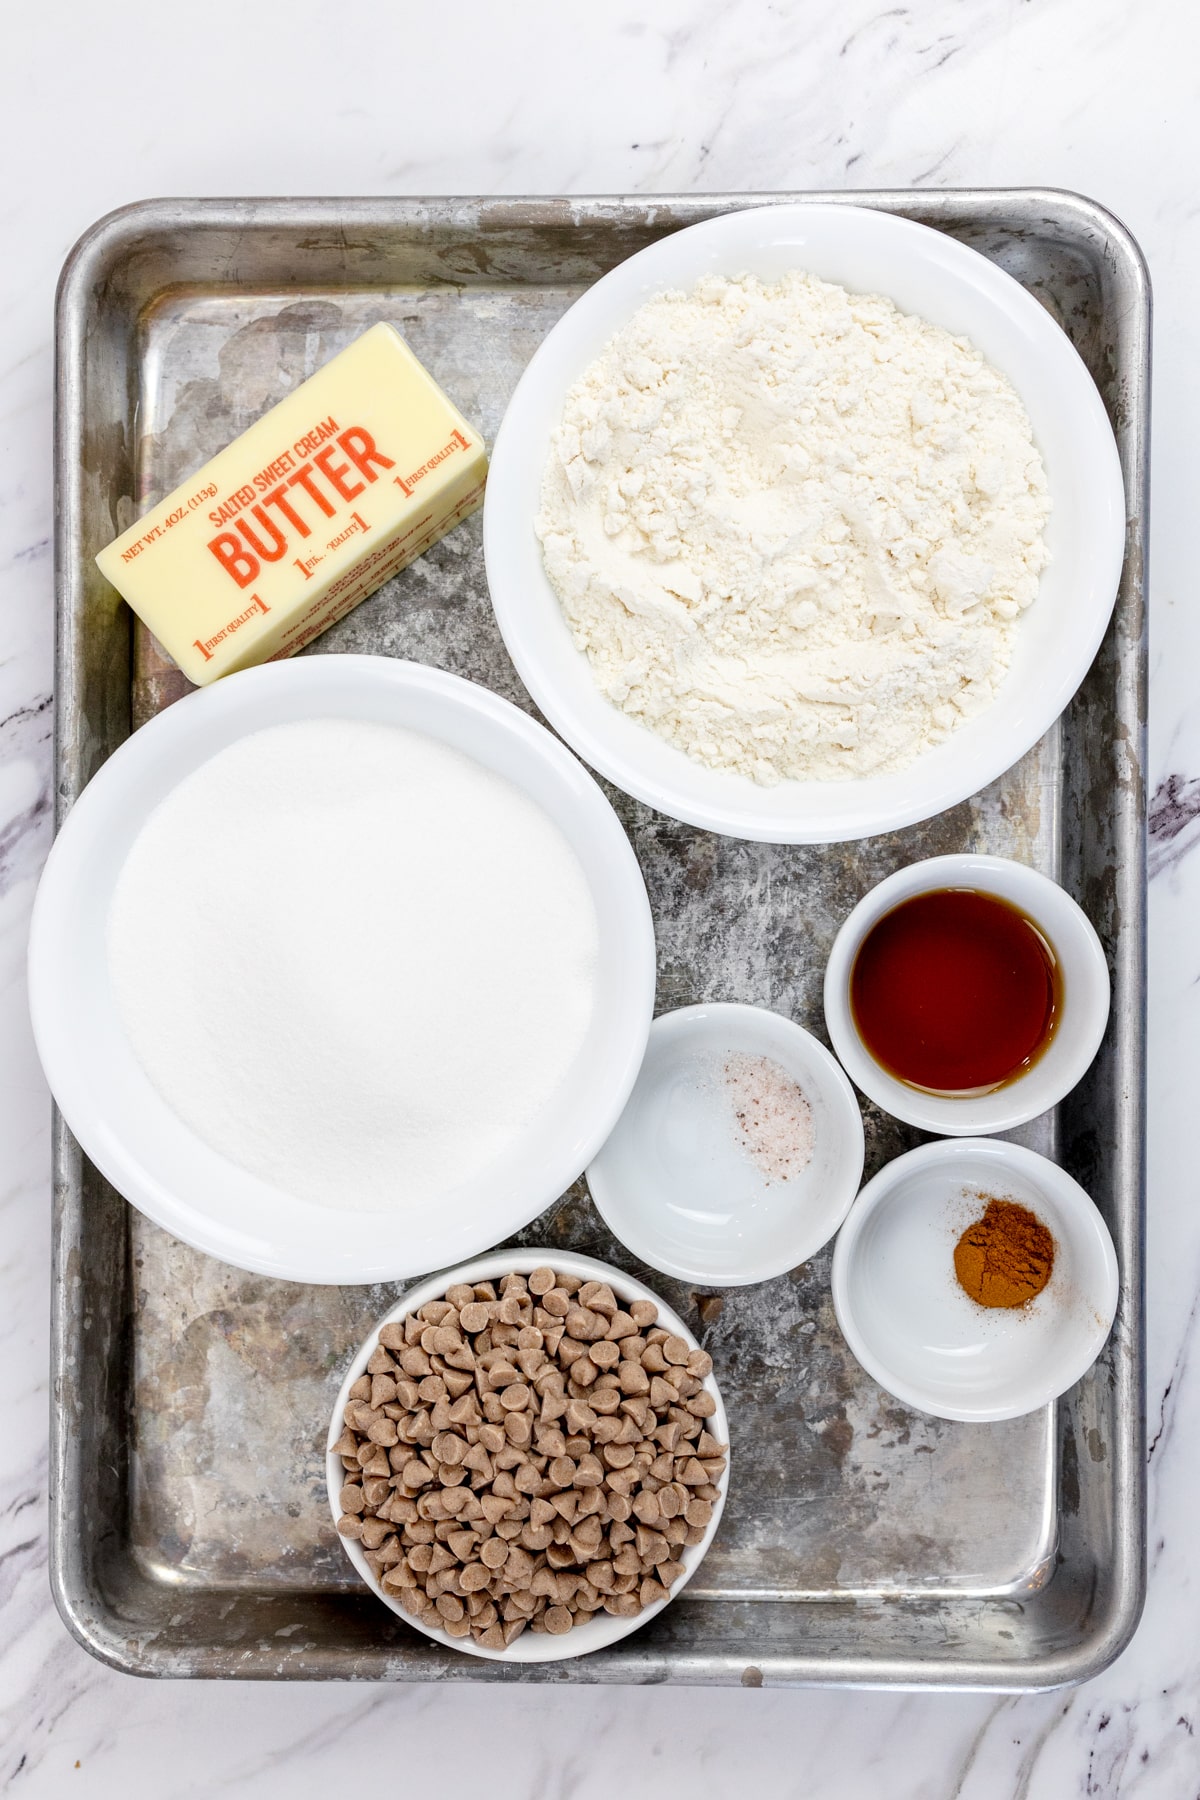 Top view of ingredients needed to make Edible Snickerdoodle Cookie Dough in small bowls on a baking tray.